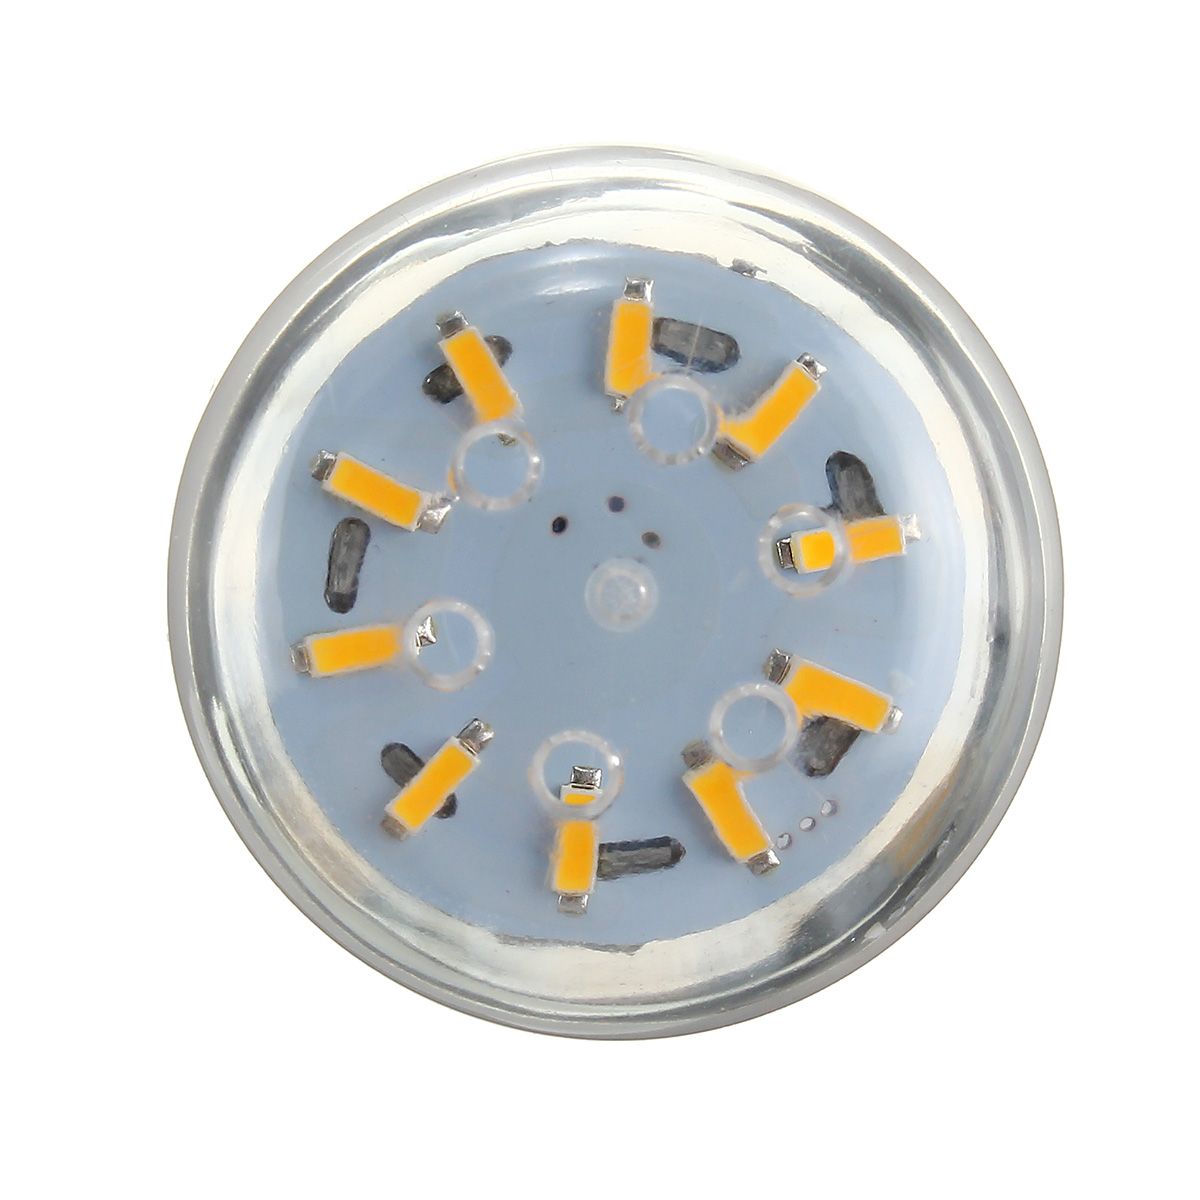 6W-E27-E14-E12-G9-GU10-B22-SMD4014-LED-Corn-Light-Bulb-Lamp-Non-dimmable-1125809